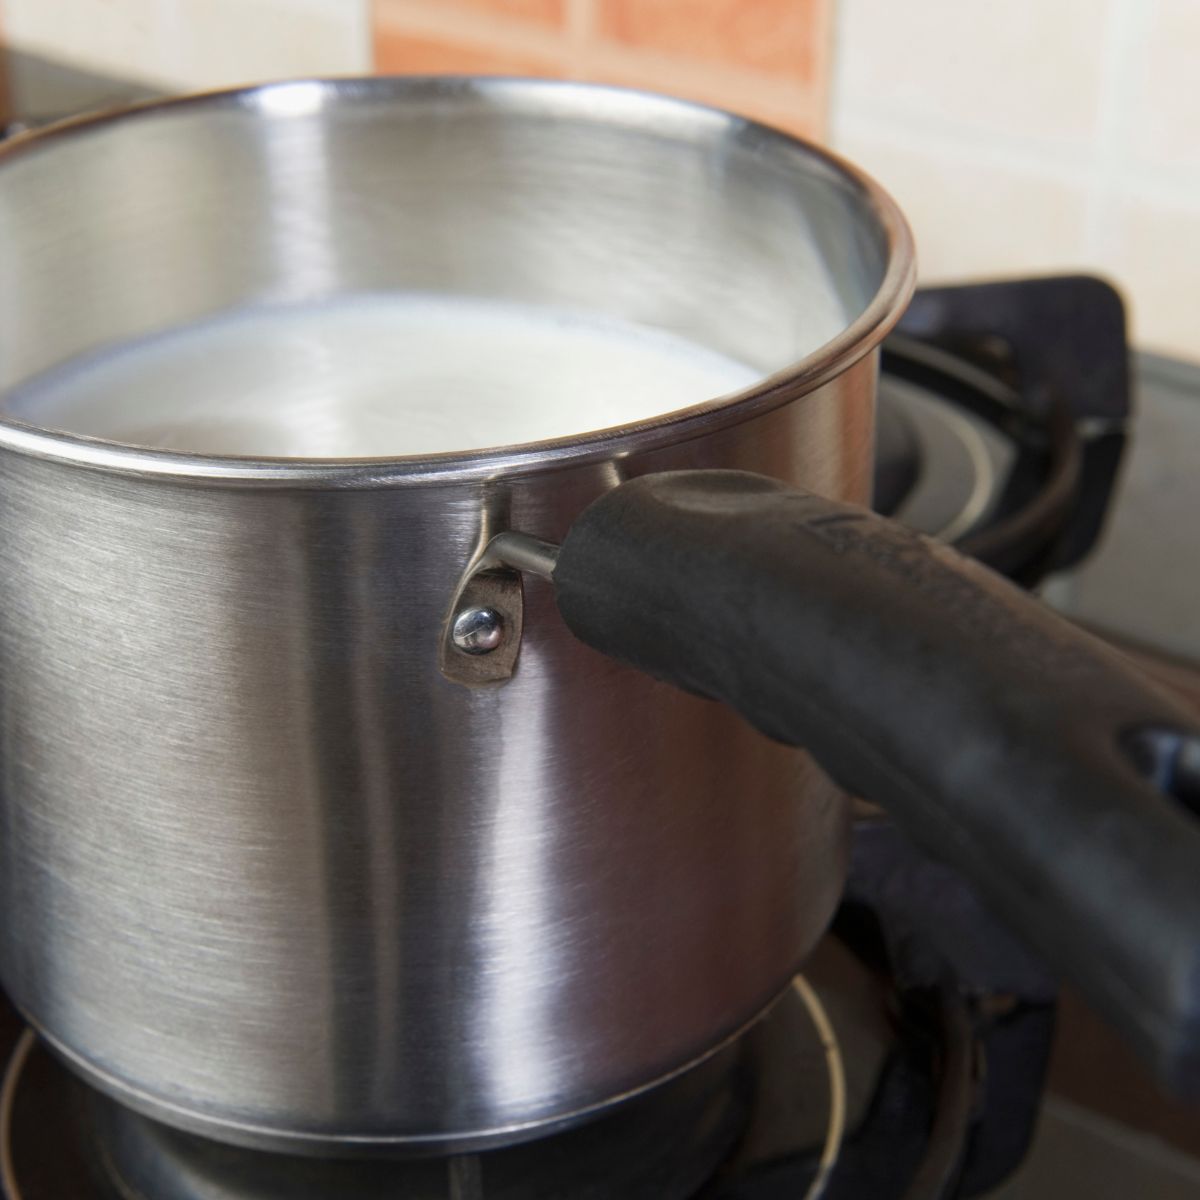 Milk being heated in a small saucepan on the stove